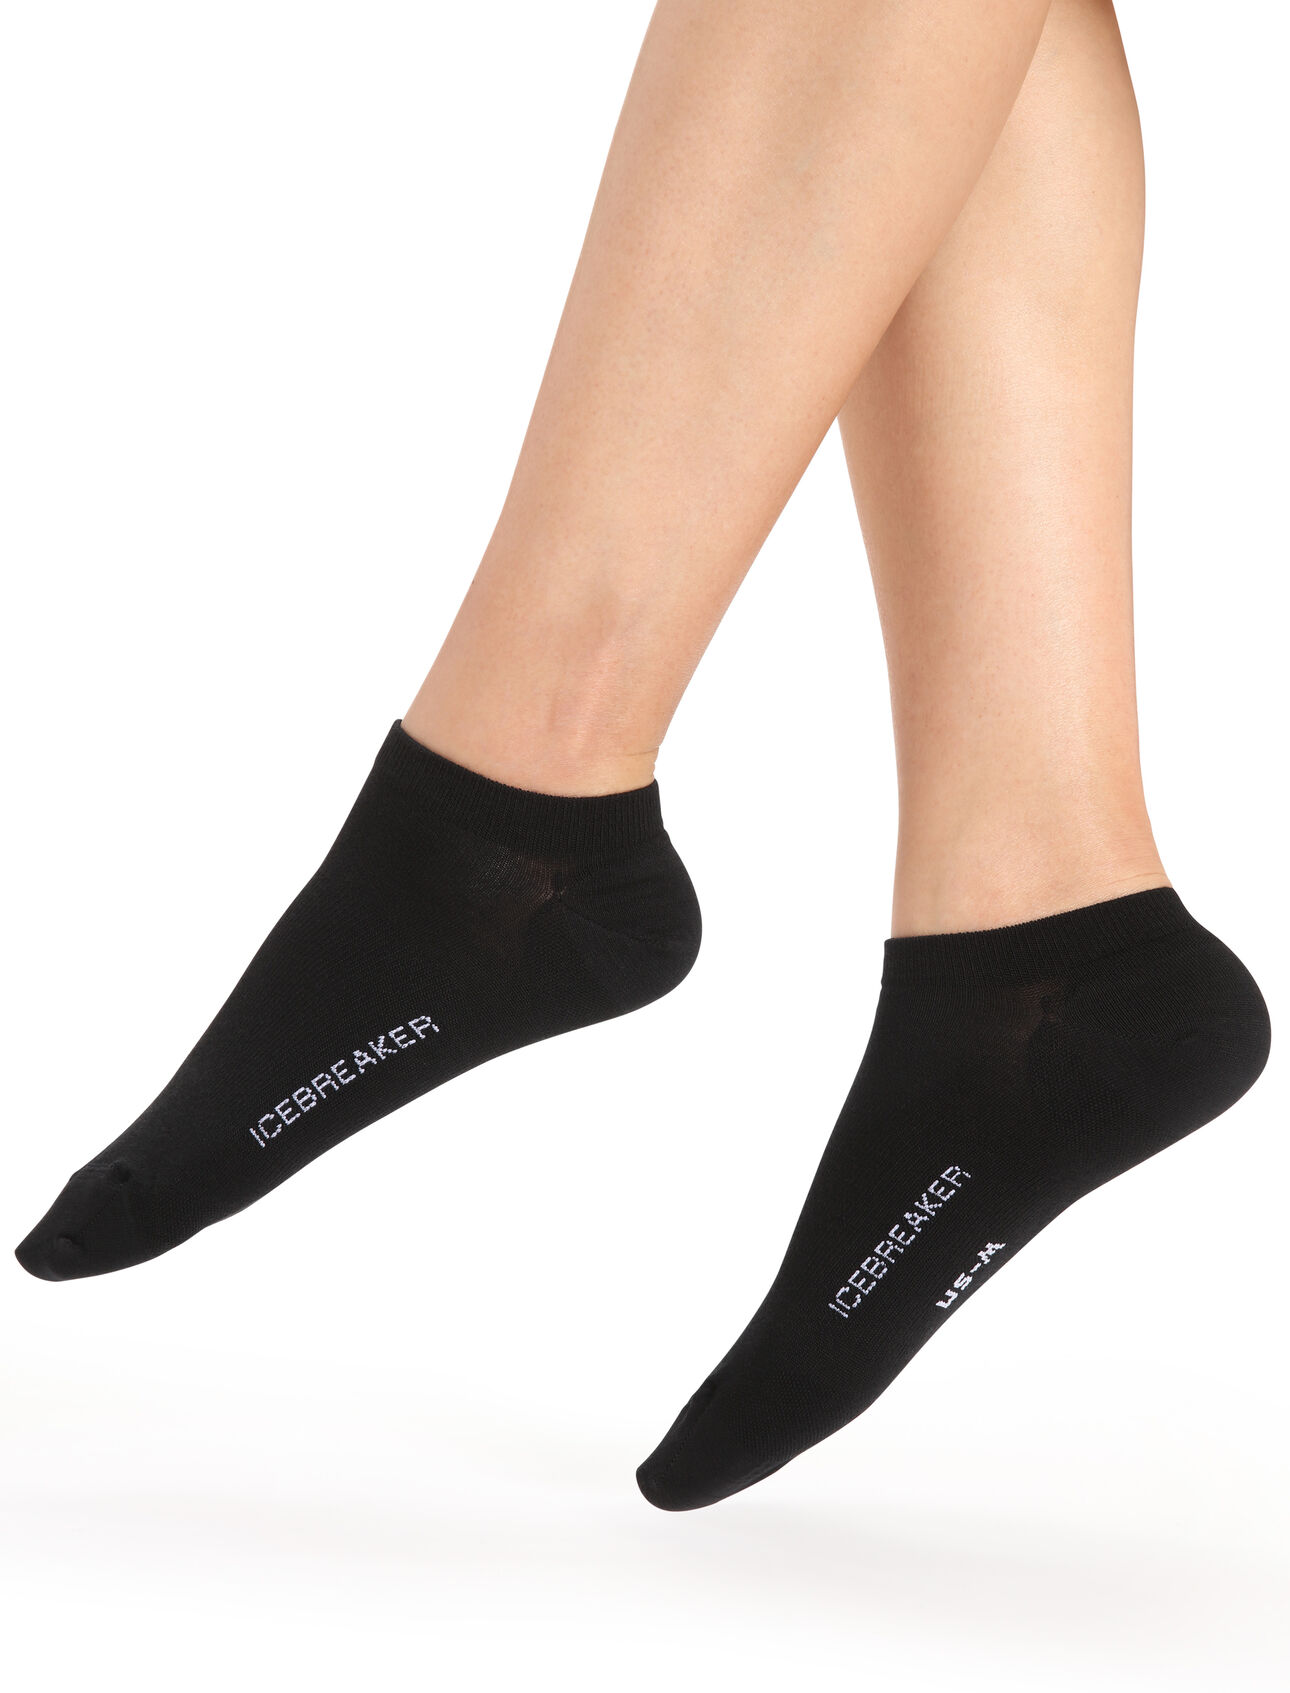 Womens Merino Lifestyle Fine Gauge No Show Socks Lightweight casual socks perfect for everyday use, the Lifestyle Fine Gauge No Show combines premium merino wool comfort with a durable construction.